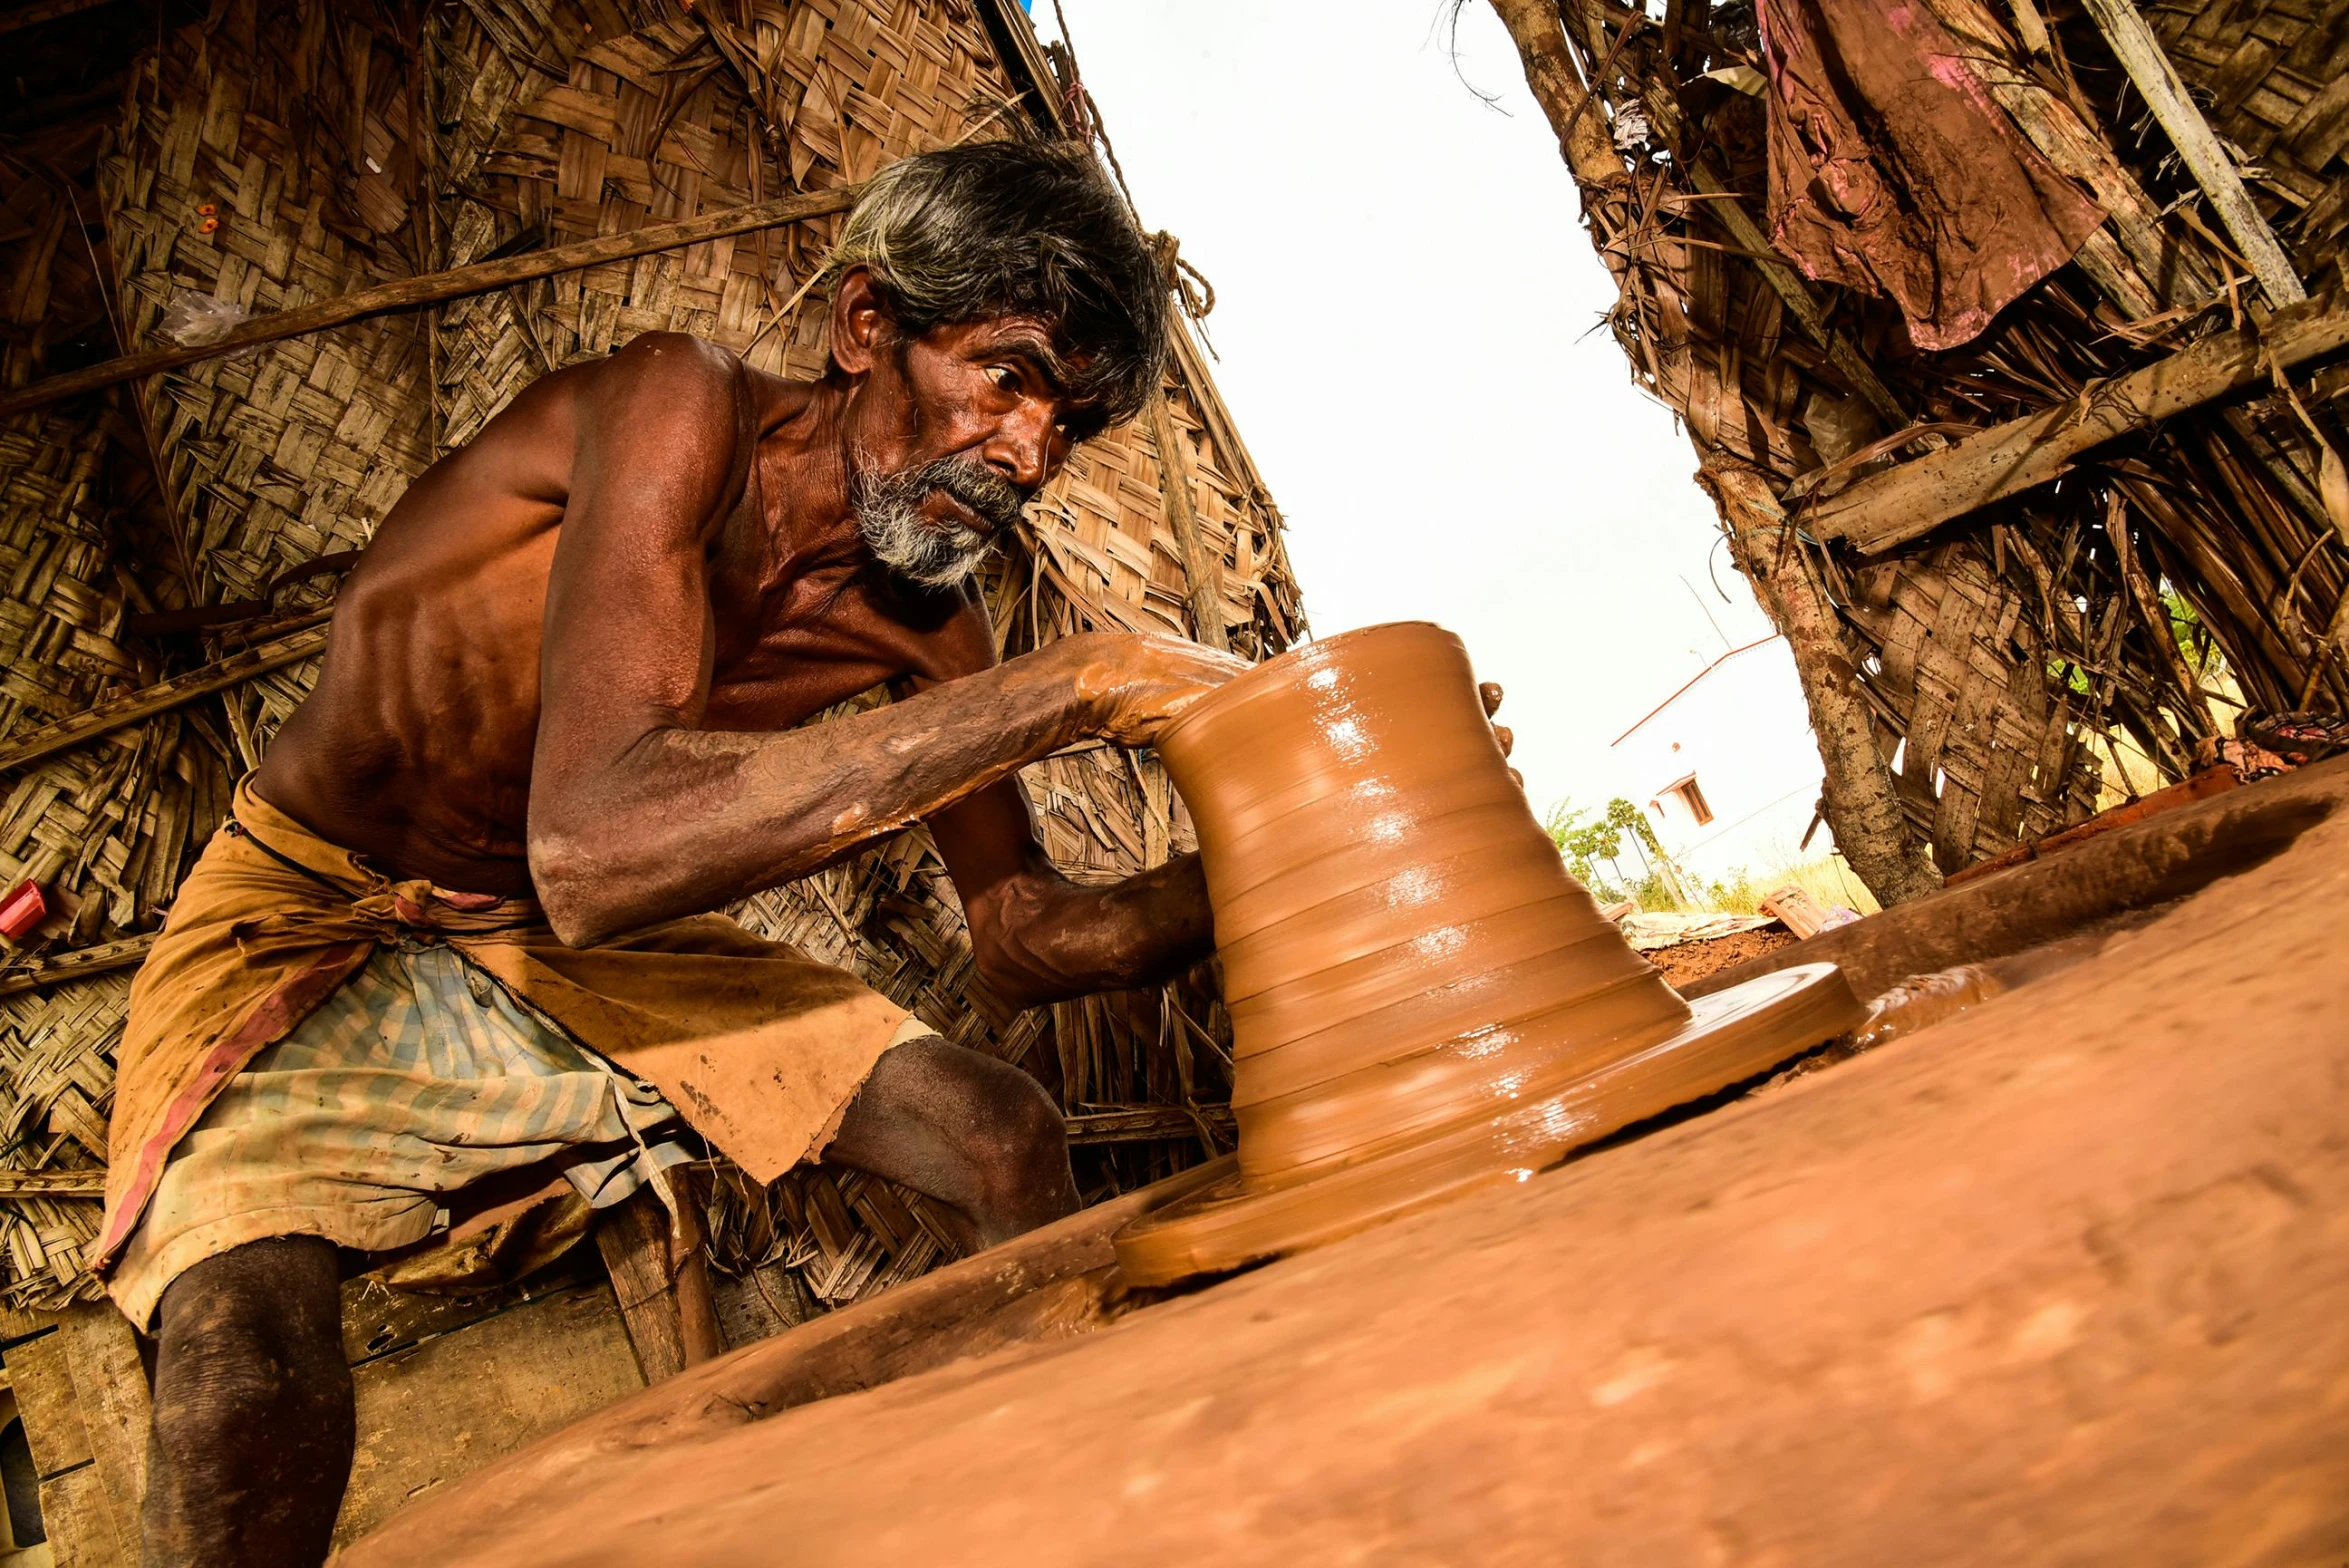 the man is making the pots on the pottery wheel